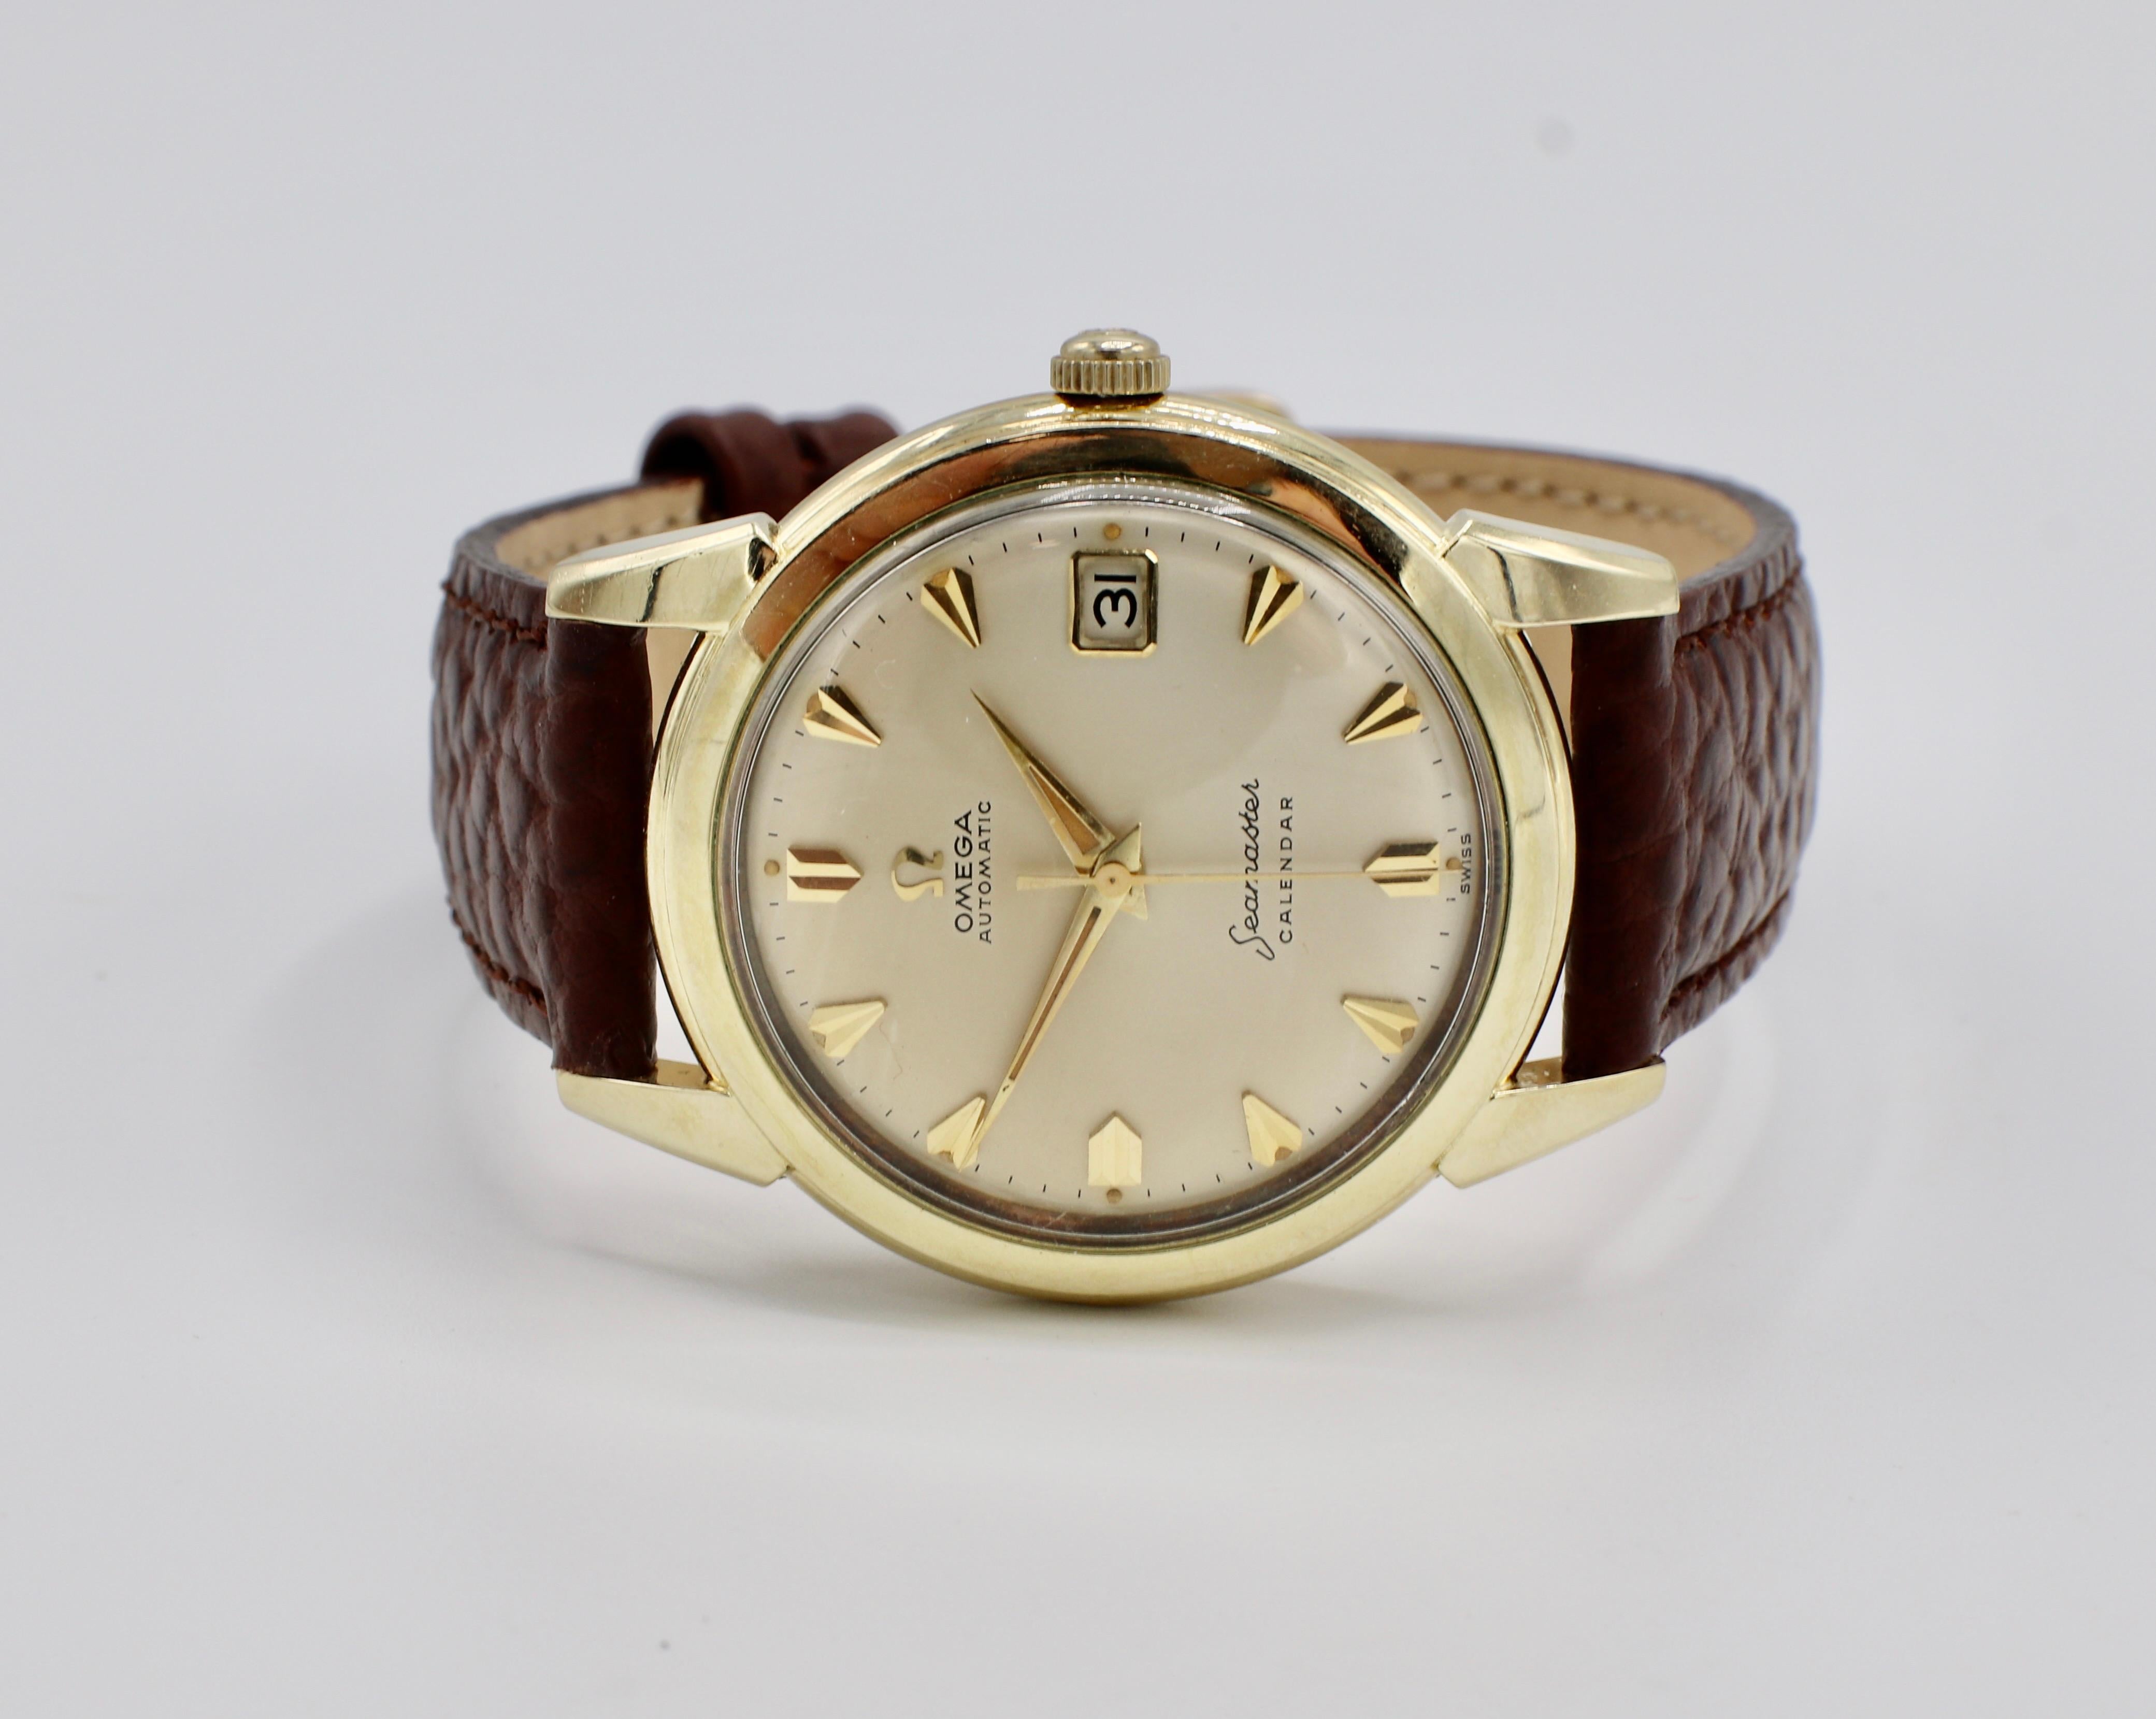 Vintage Omega Seamaster Automatic Calendar Gold Filled Watch 2